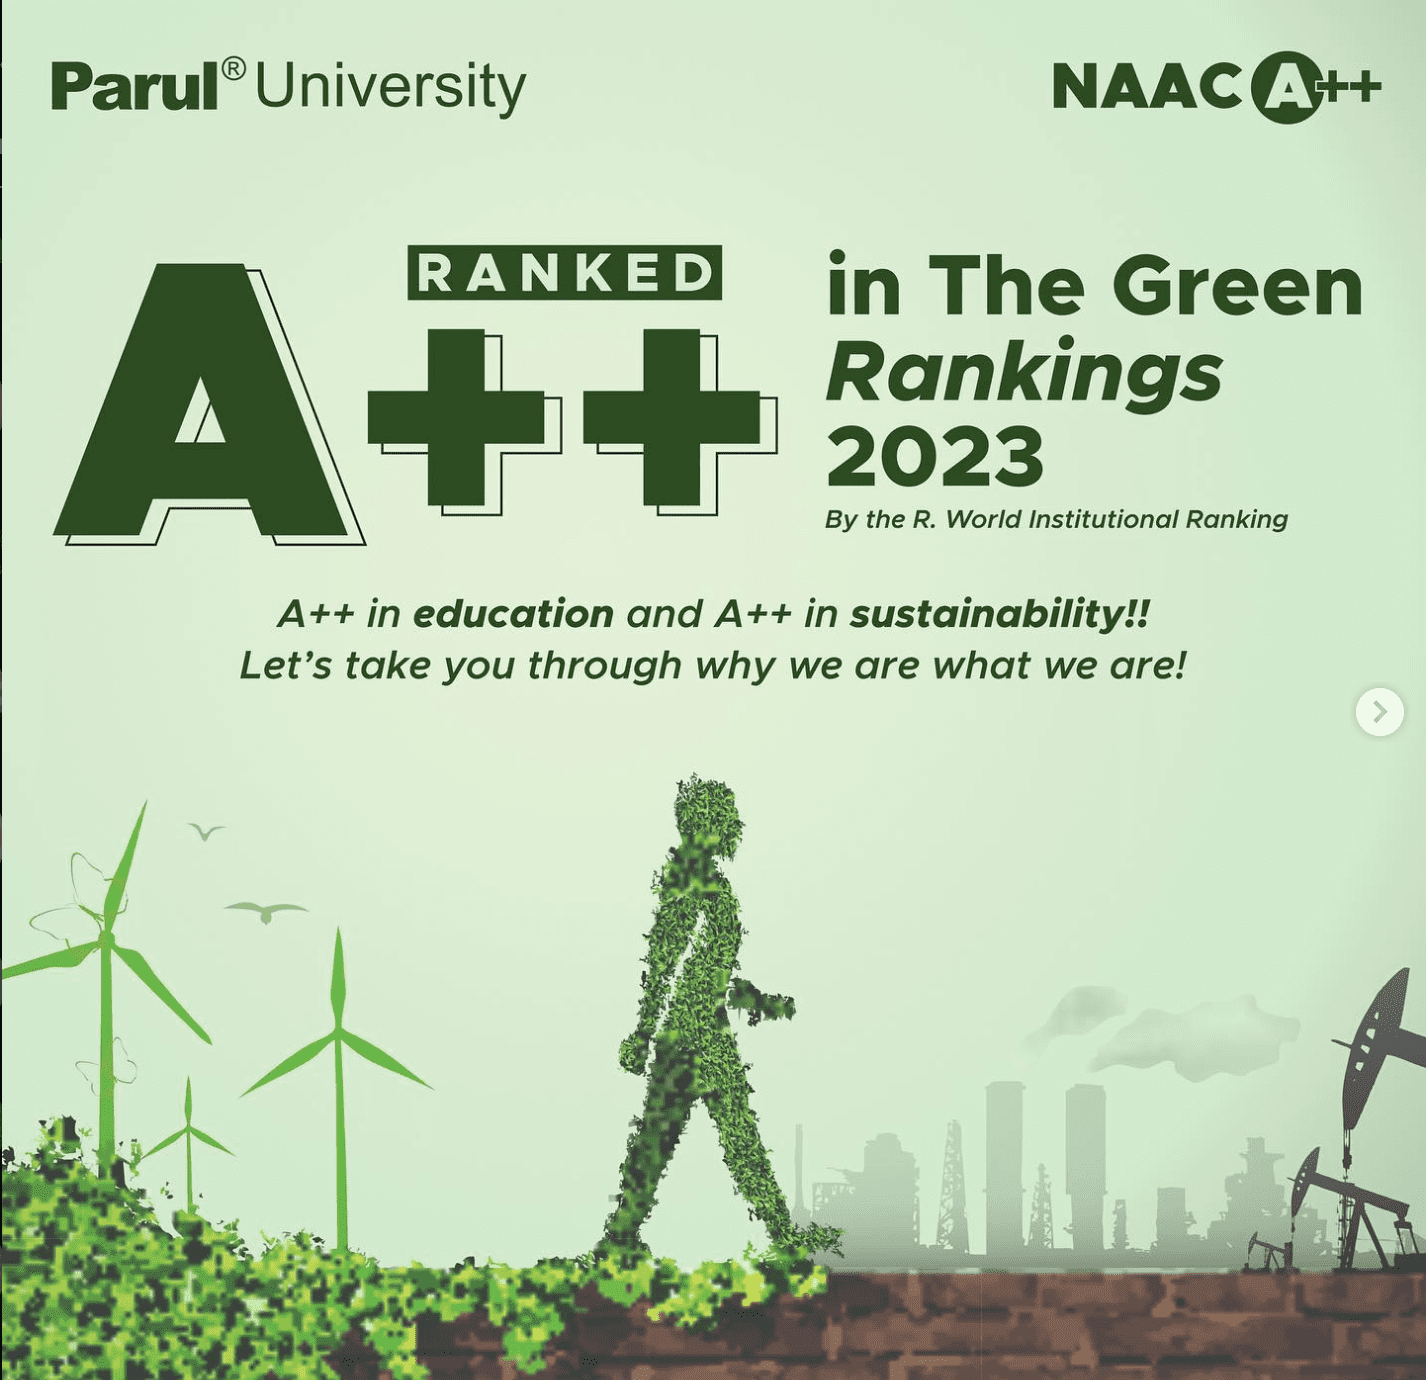 The Green Rankings 2023